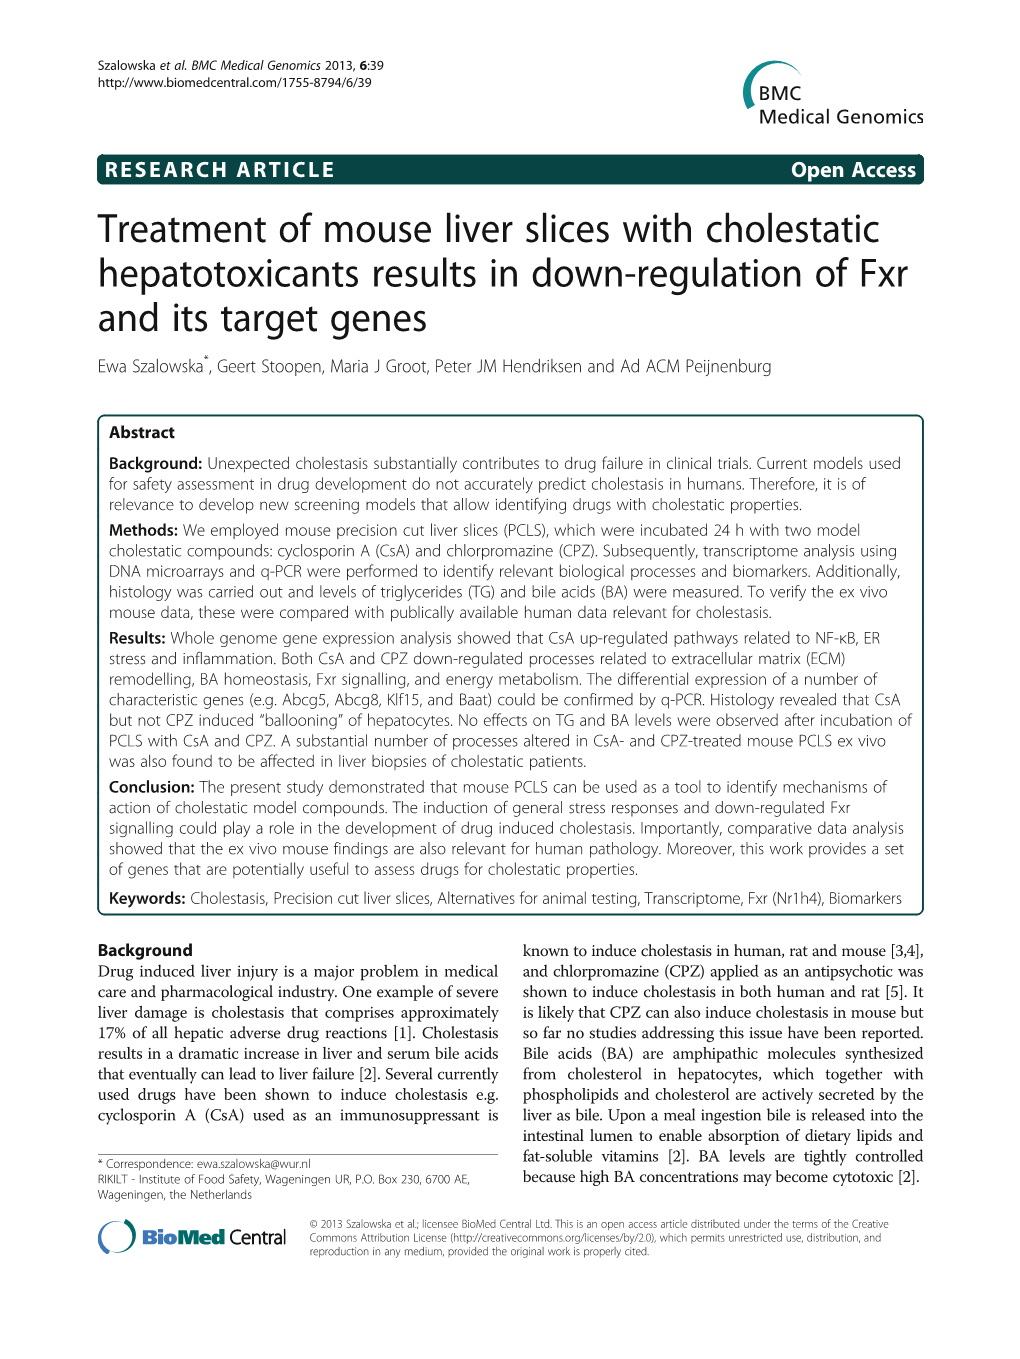 Treatment of Mouse Liver Slices with Cholestatic Hepatotoxicants Results